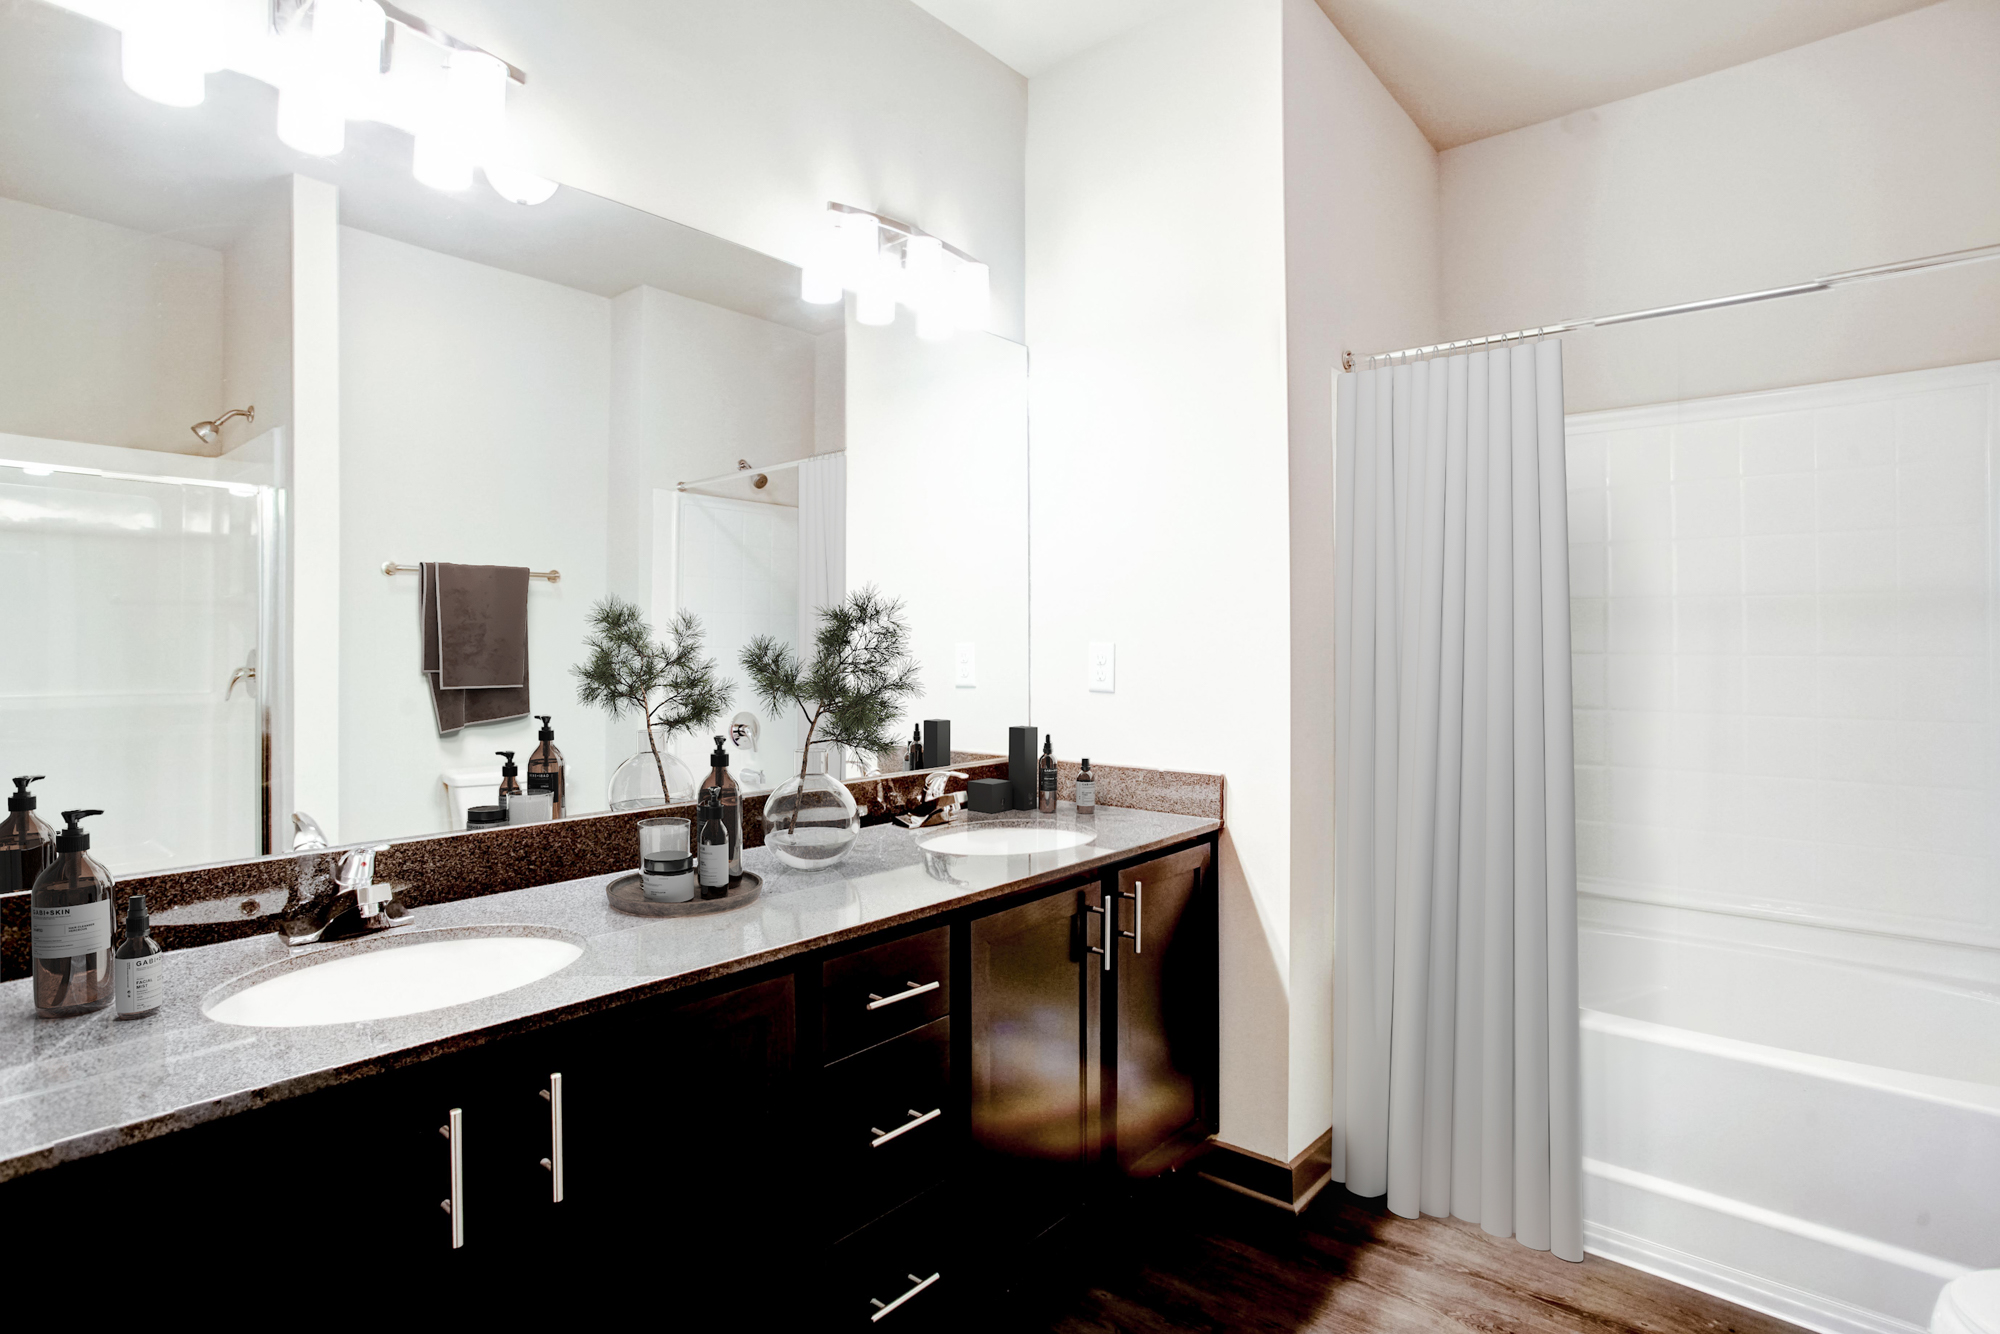 Double vanities sit atop brown colored cabinets with a dual shower and bath tub in the background.